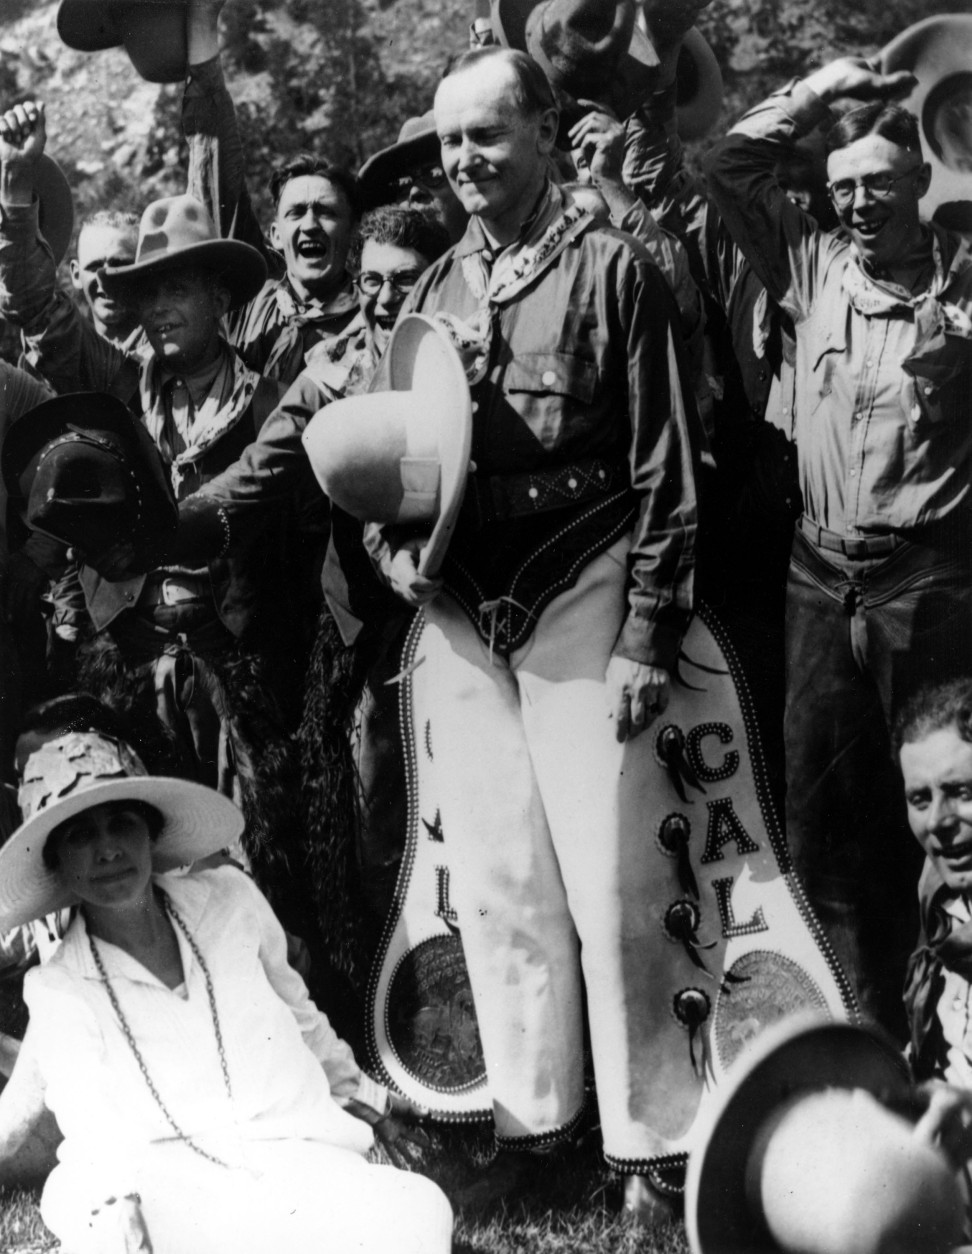 U.S. President Calvin Coolidge, clad in cowboy attire celebrates the Fourth of July Holiday with his wife Grace Goodhue Coolidge in Rapid City North Dakota on July 4, 1927.  Others are unidentified.  (AP Photo)